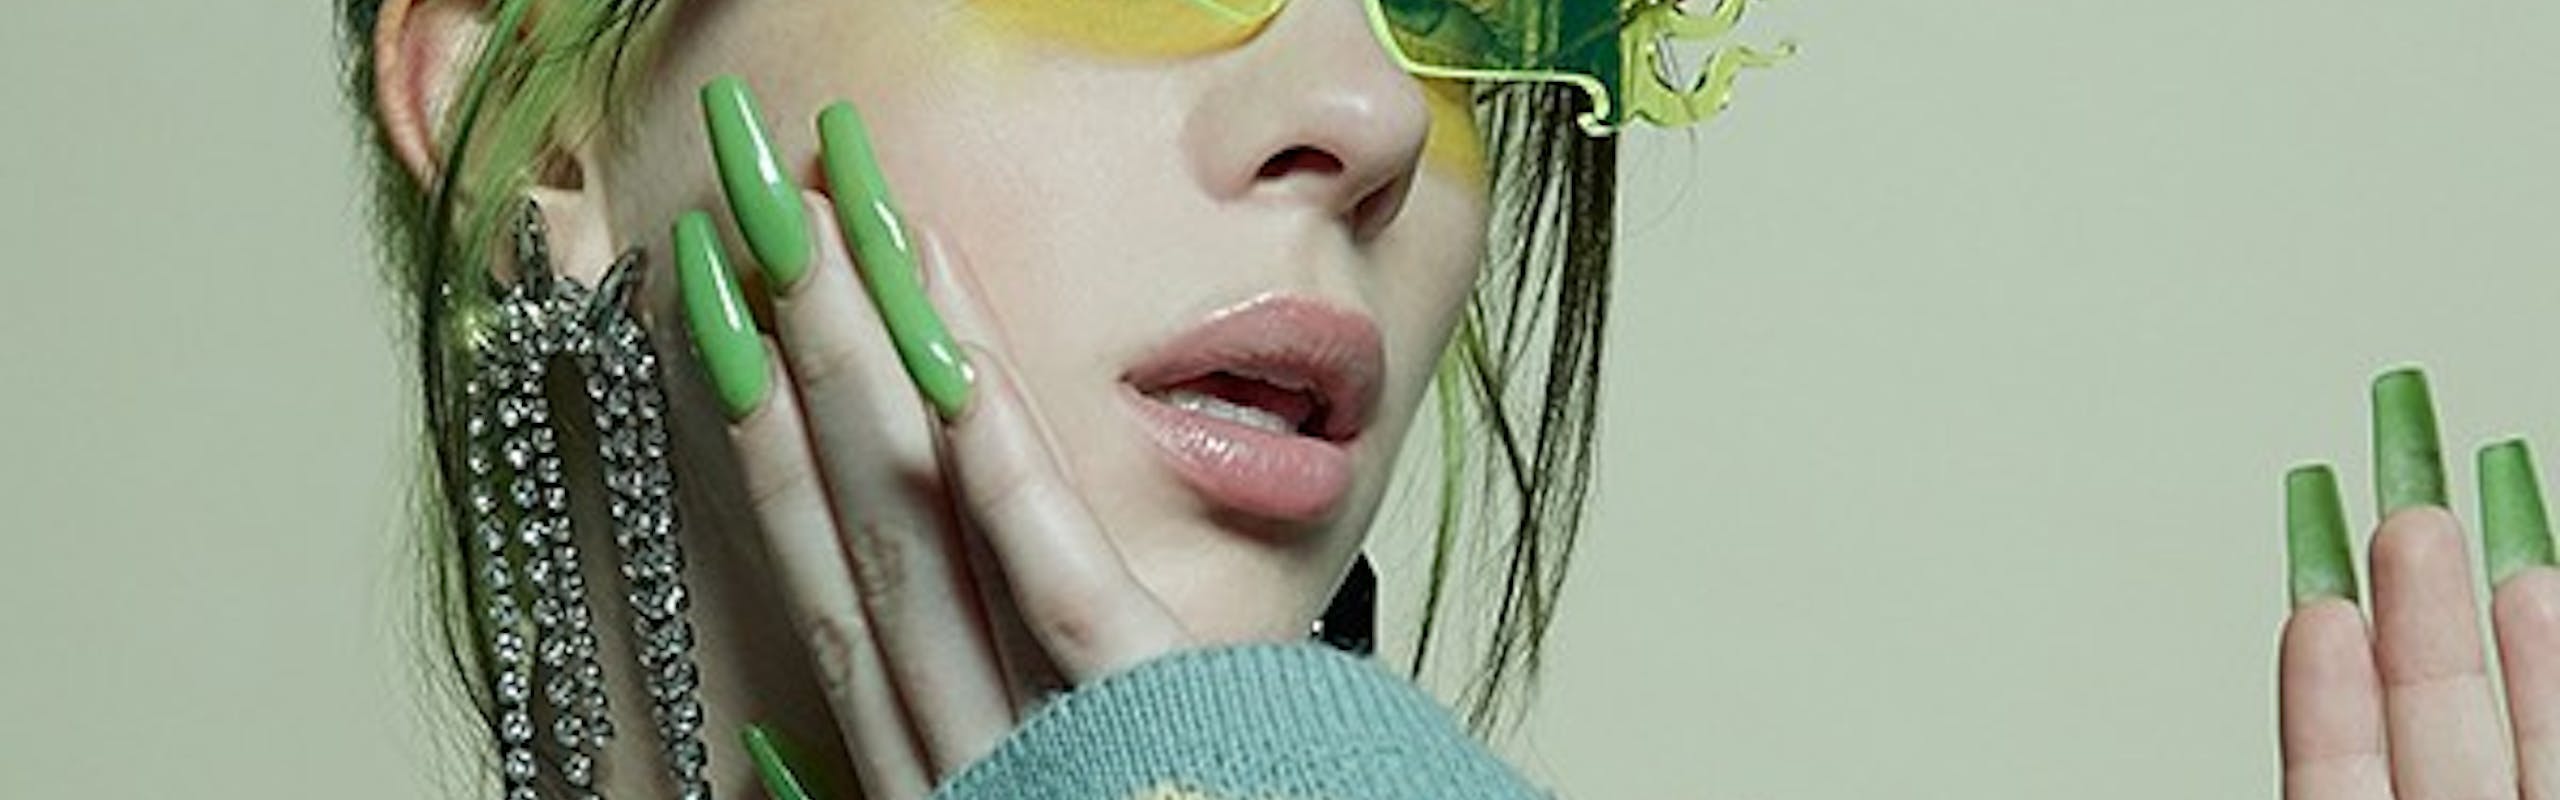 Billie Eilish with green and black hair and long green nails wearing a pair of green flame-shaped sunglasses